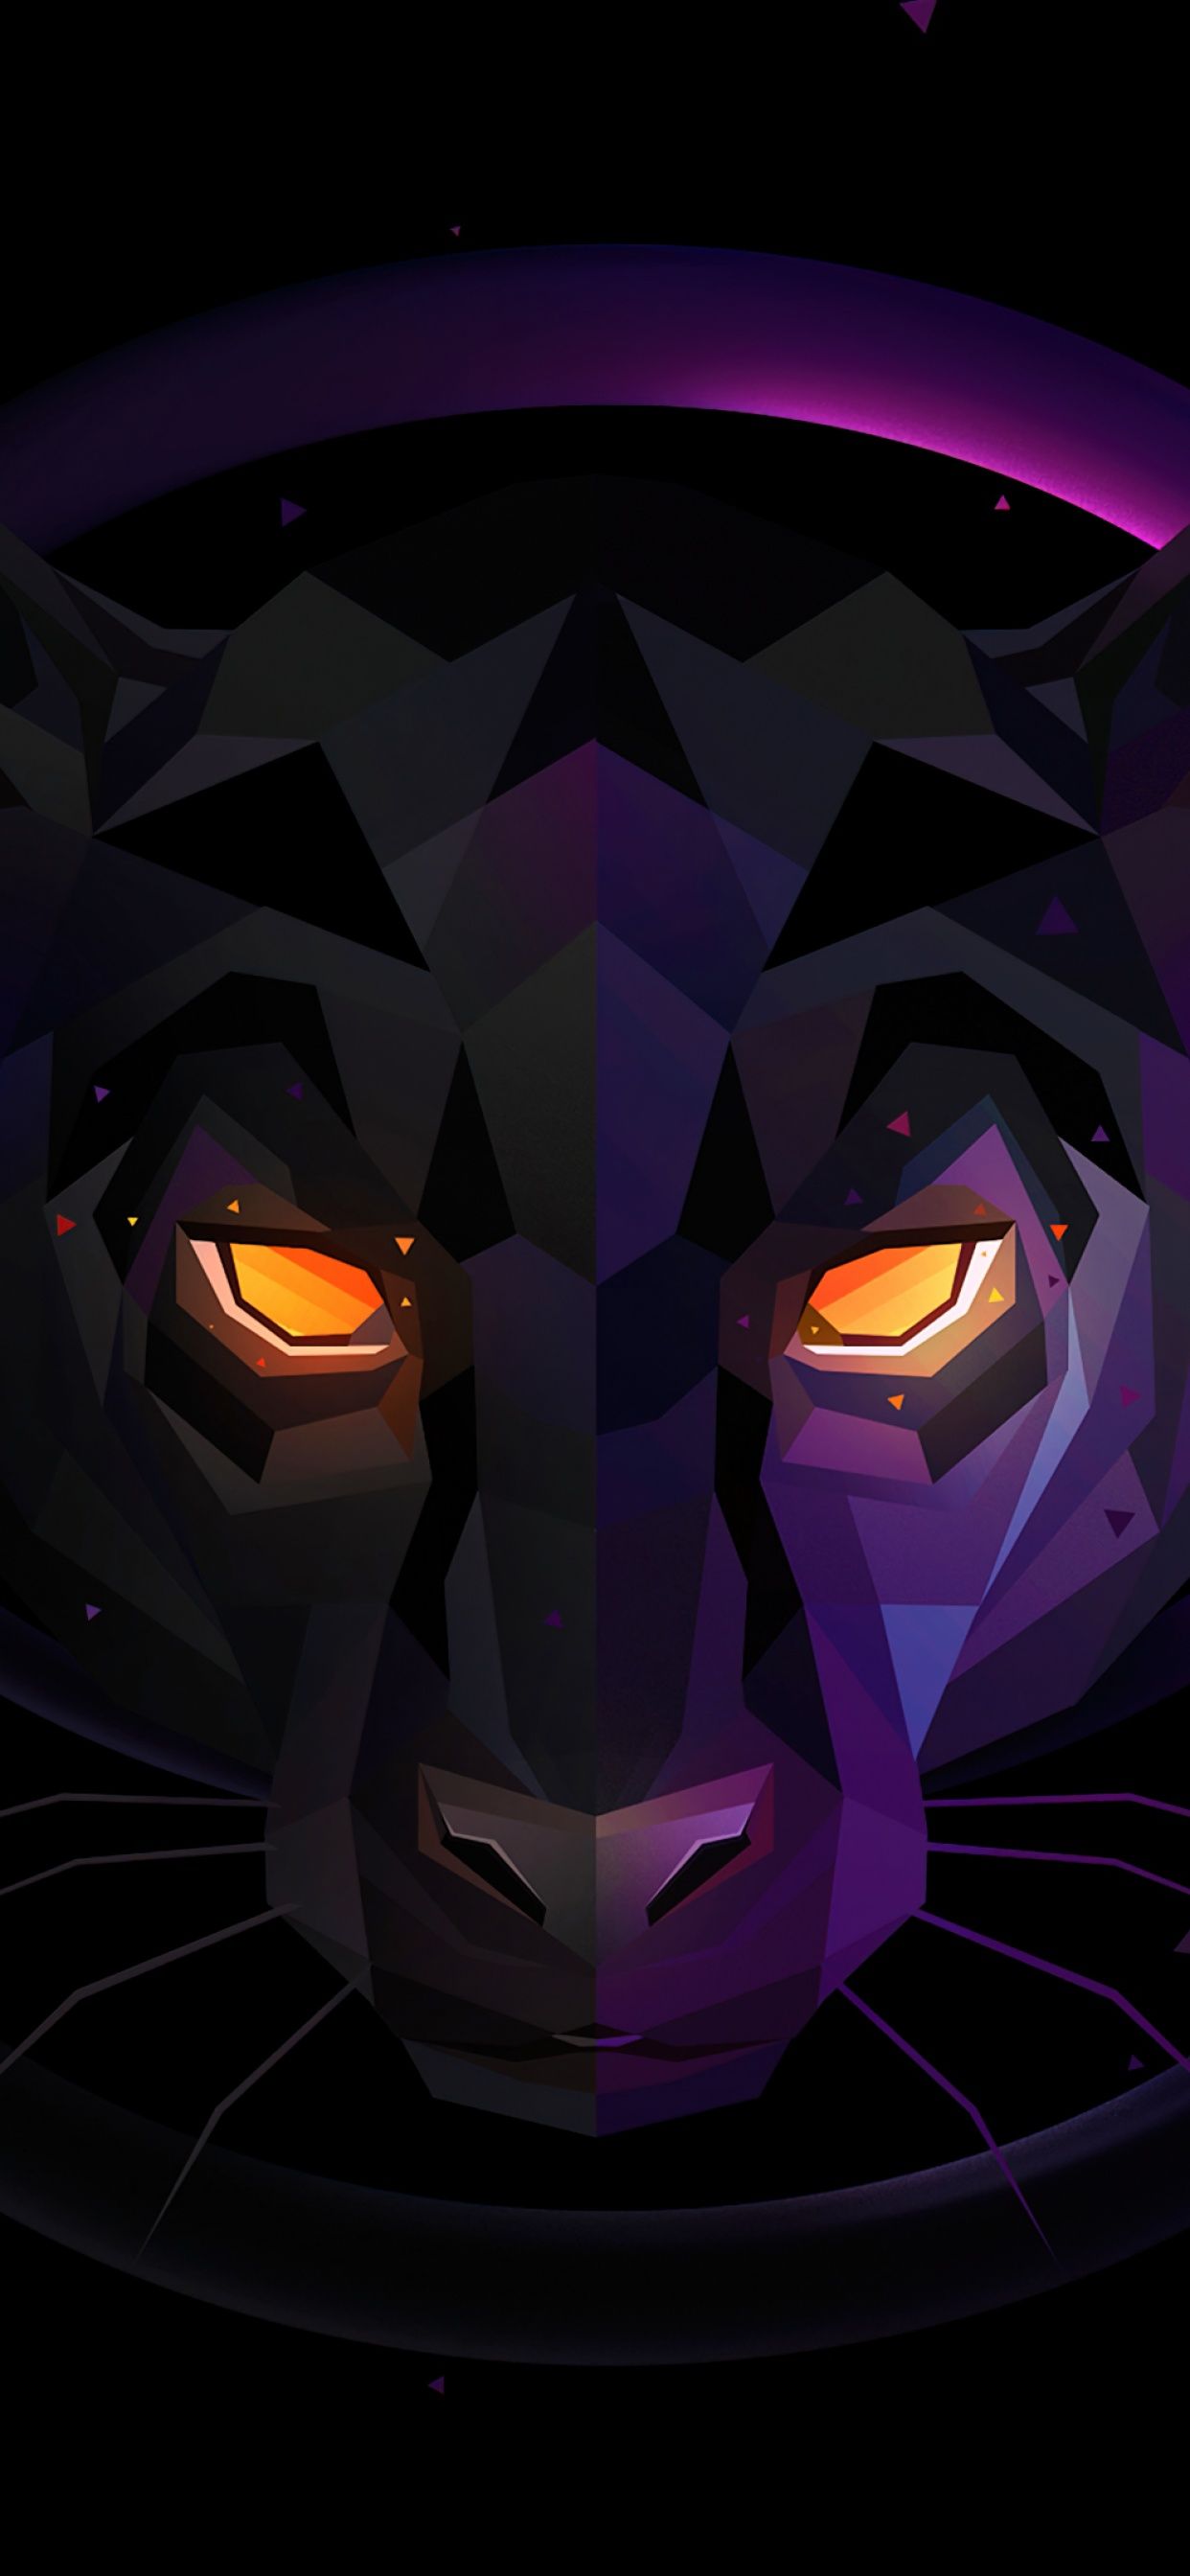 Panther Wallpaper 4K, Scary, Glowing eyes, Low poly